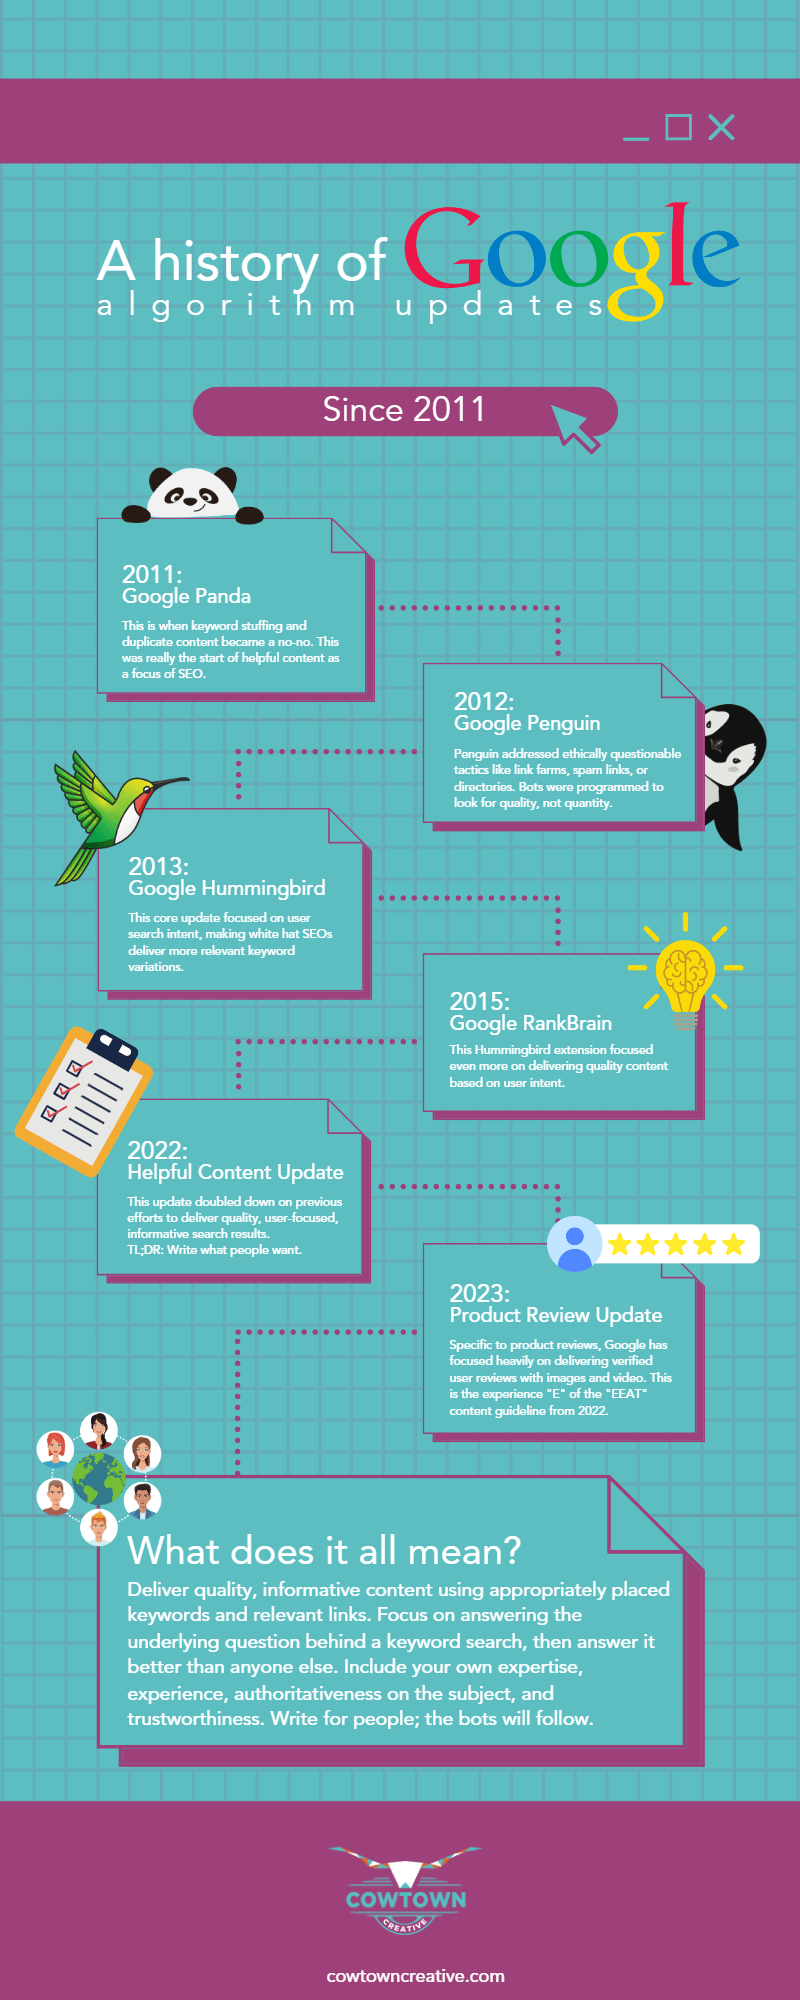 Infographic depicting a history of Google search algorithm updates since 2011 and their impact on local Fort Worth SEO practices at Cowtown Creative.